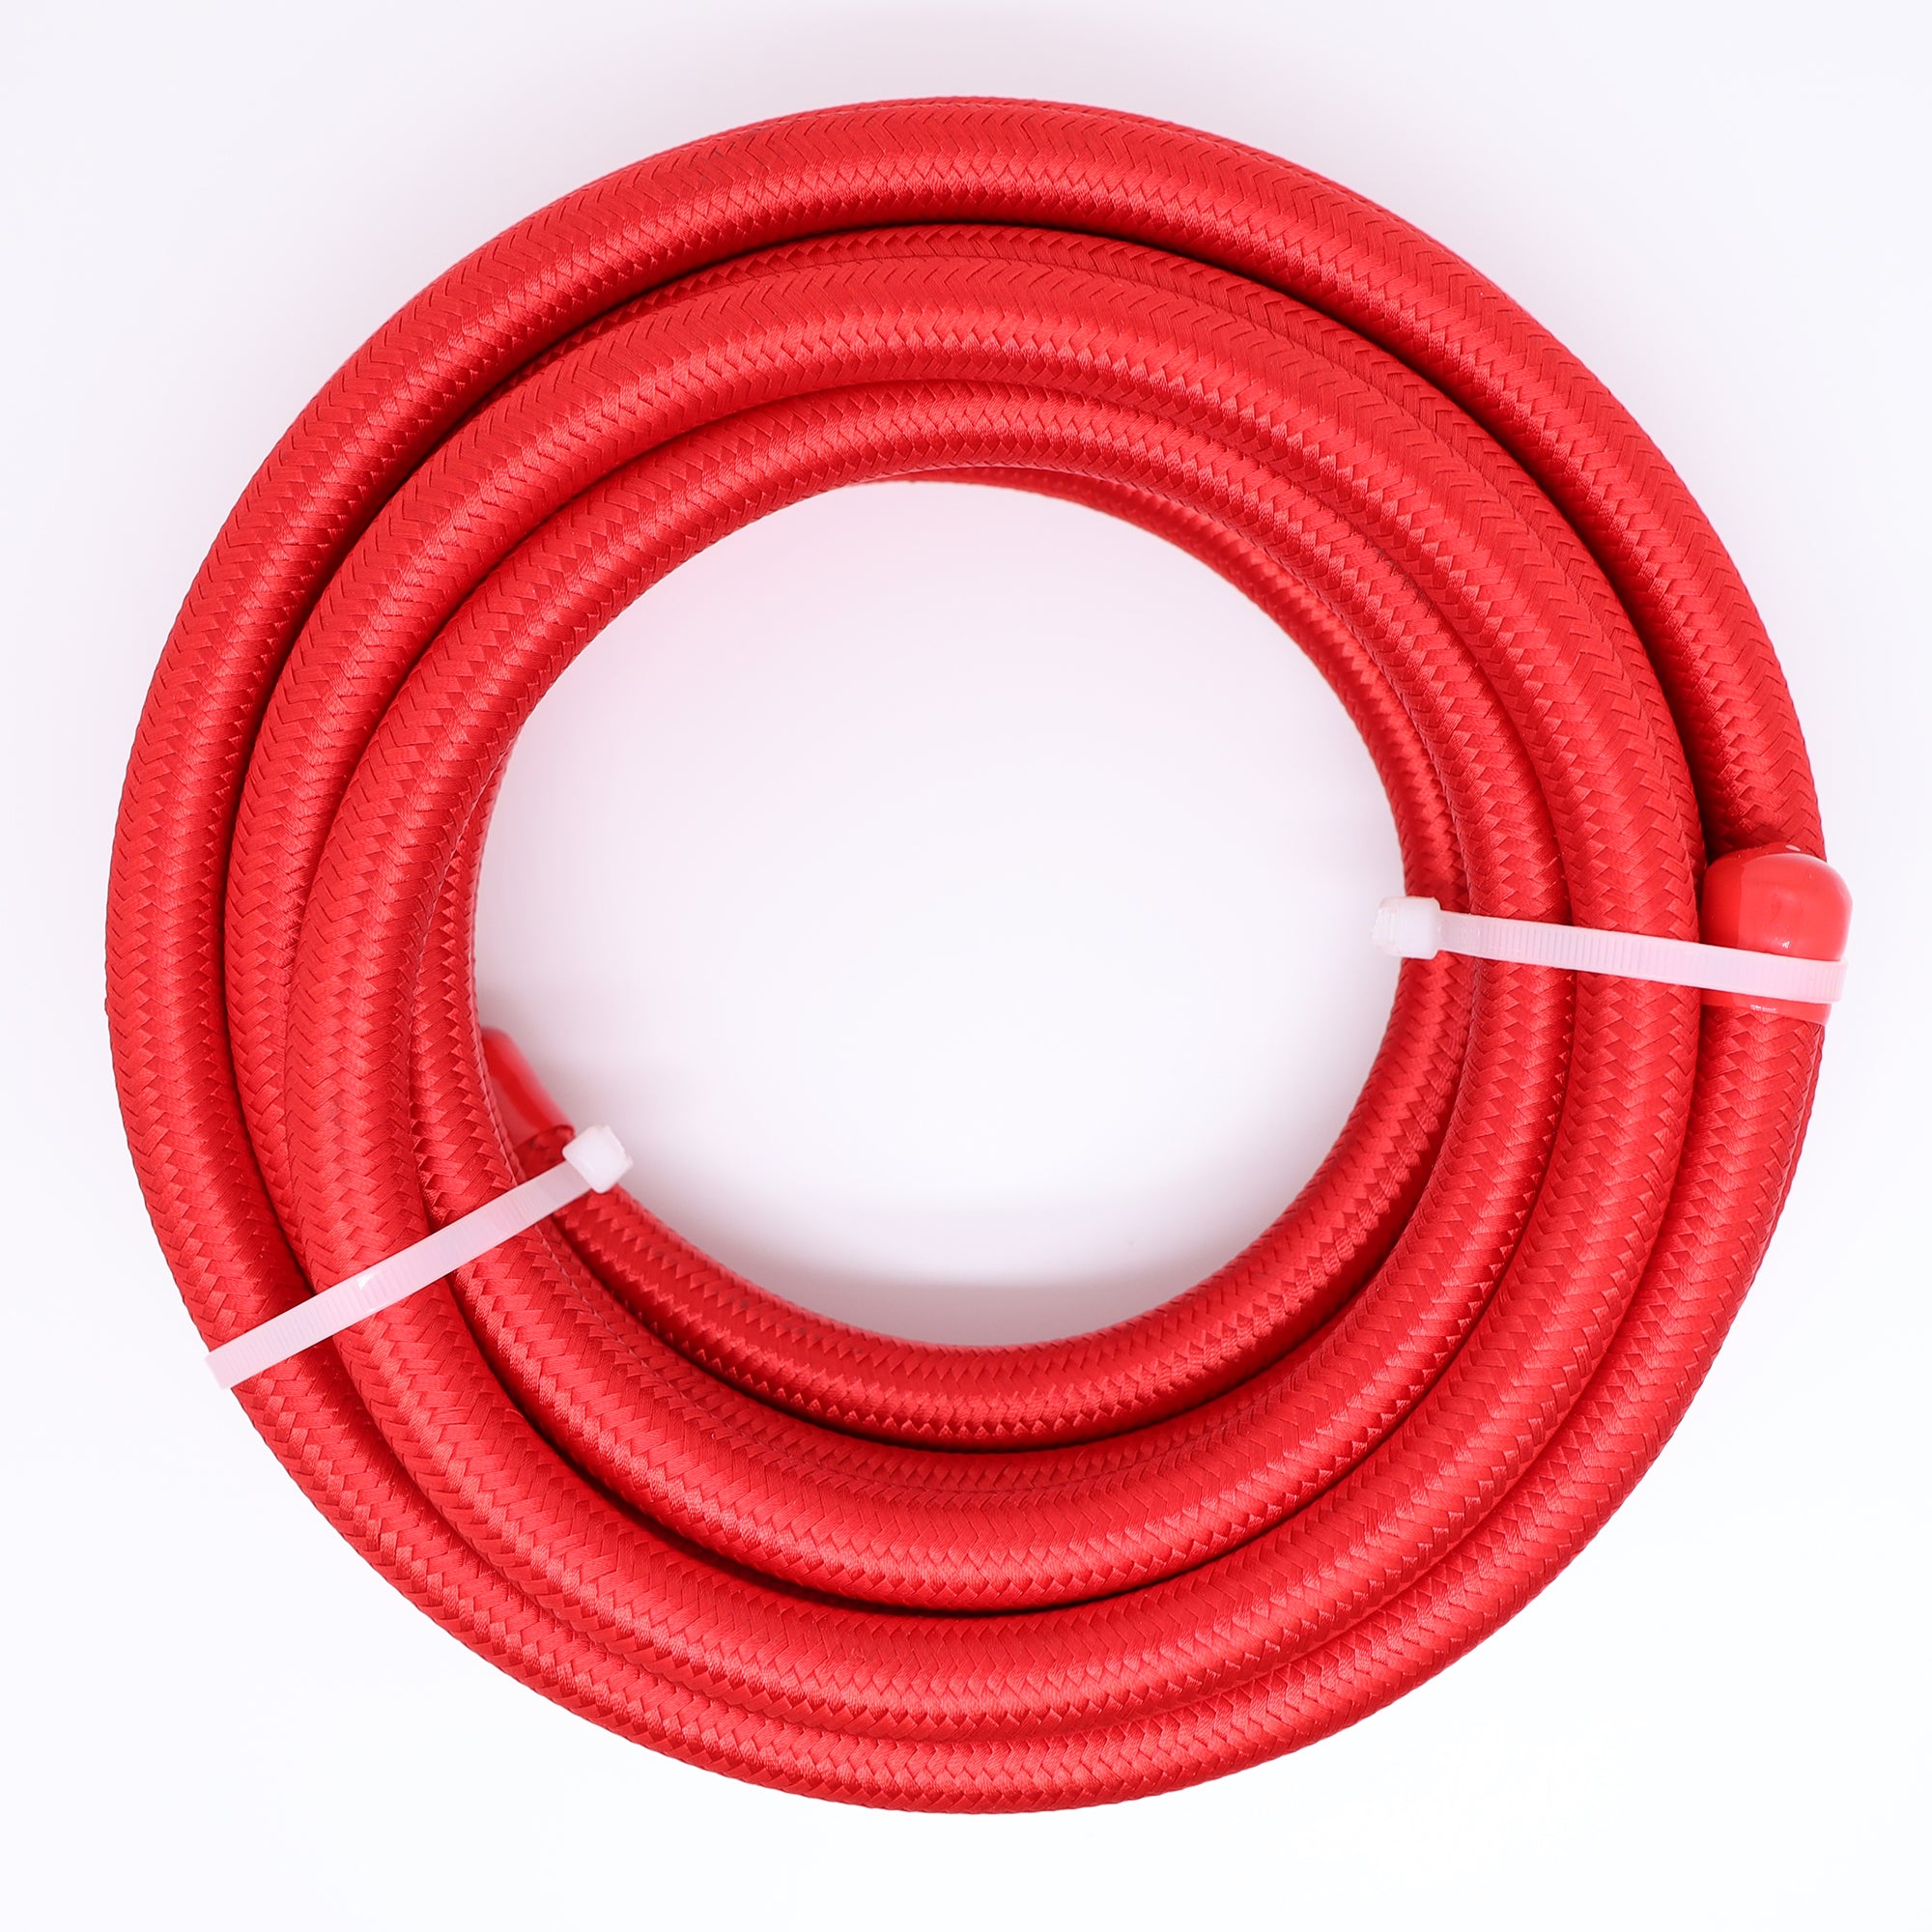 Nylon Stainless Steel Braided PTFE Fuel Hose - Blue/Red/Black 3/8 10mm ID - PTFE 20ft Hose / Red